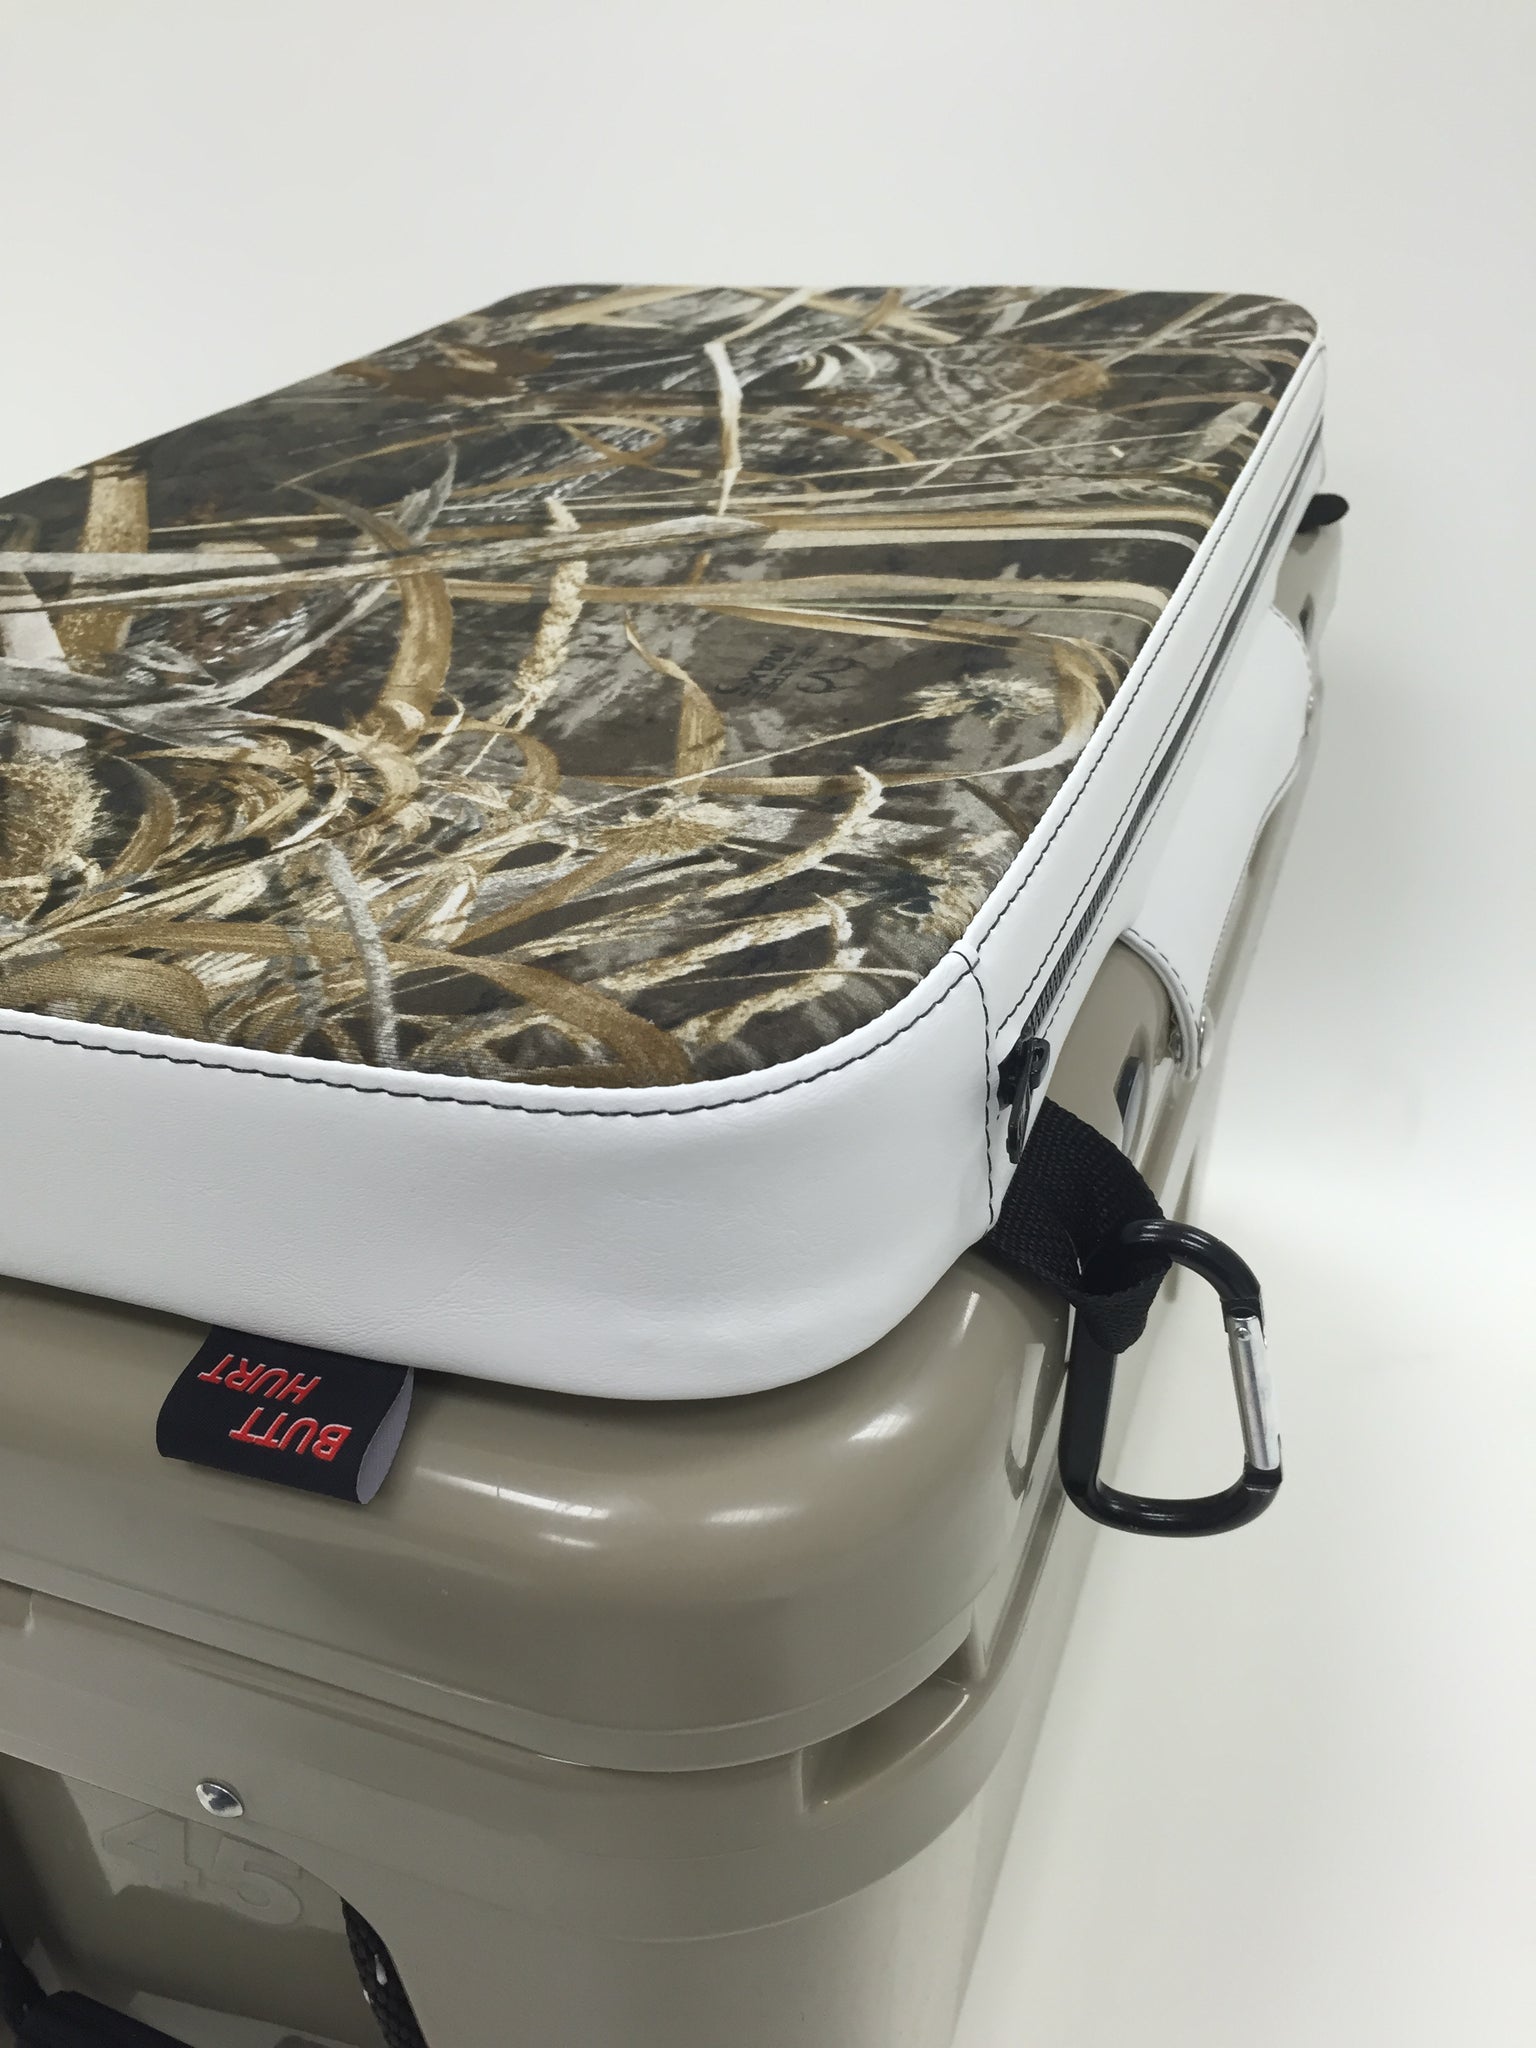 RTIC Cooler Cushion / Seat? - The Hull Truth - Boating and Fishing